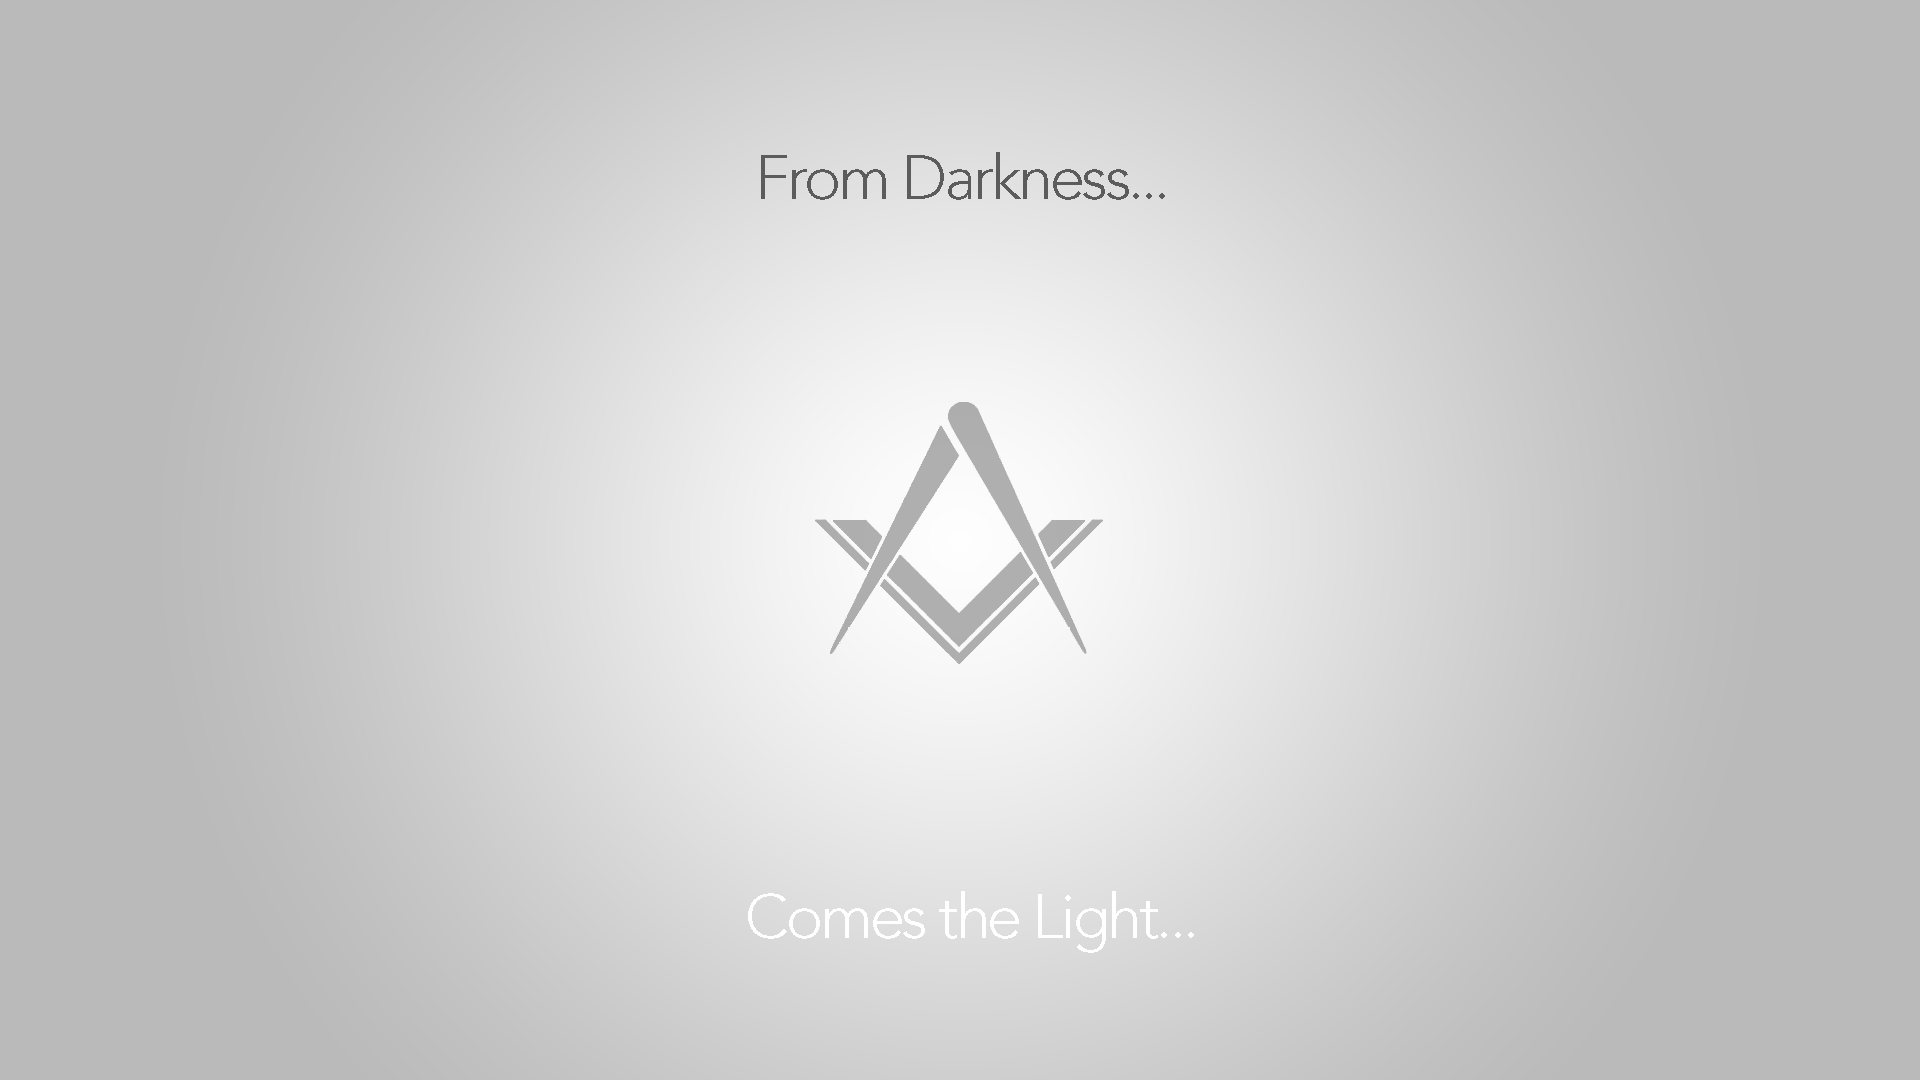 Another Wallpaper - From Darkness, Comes the Light.. freemasonry